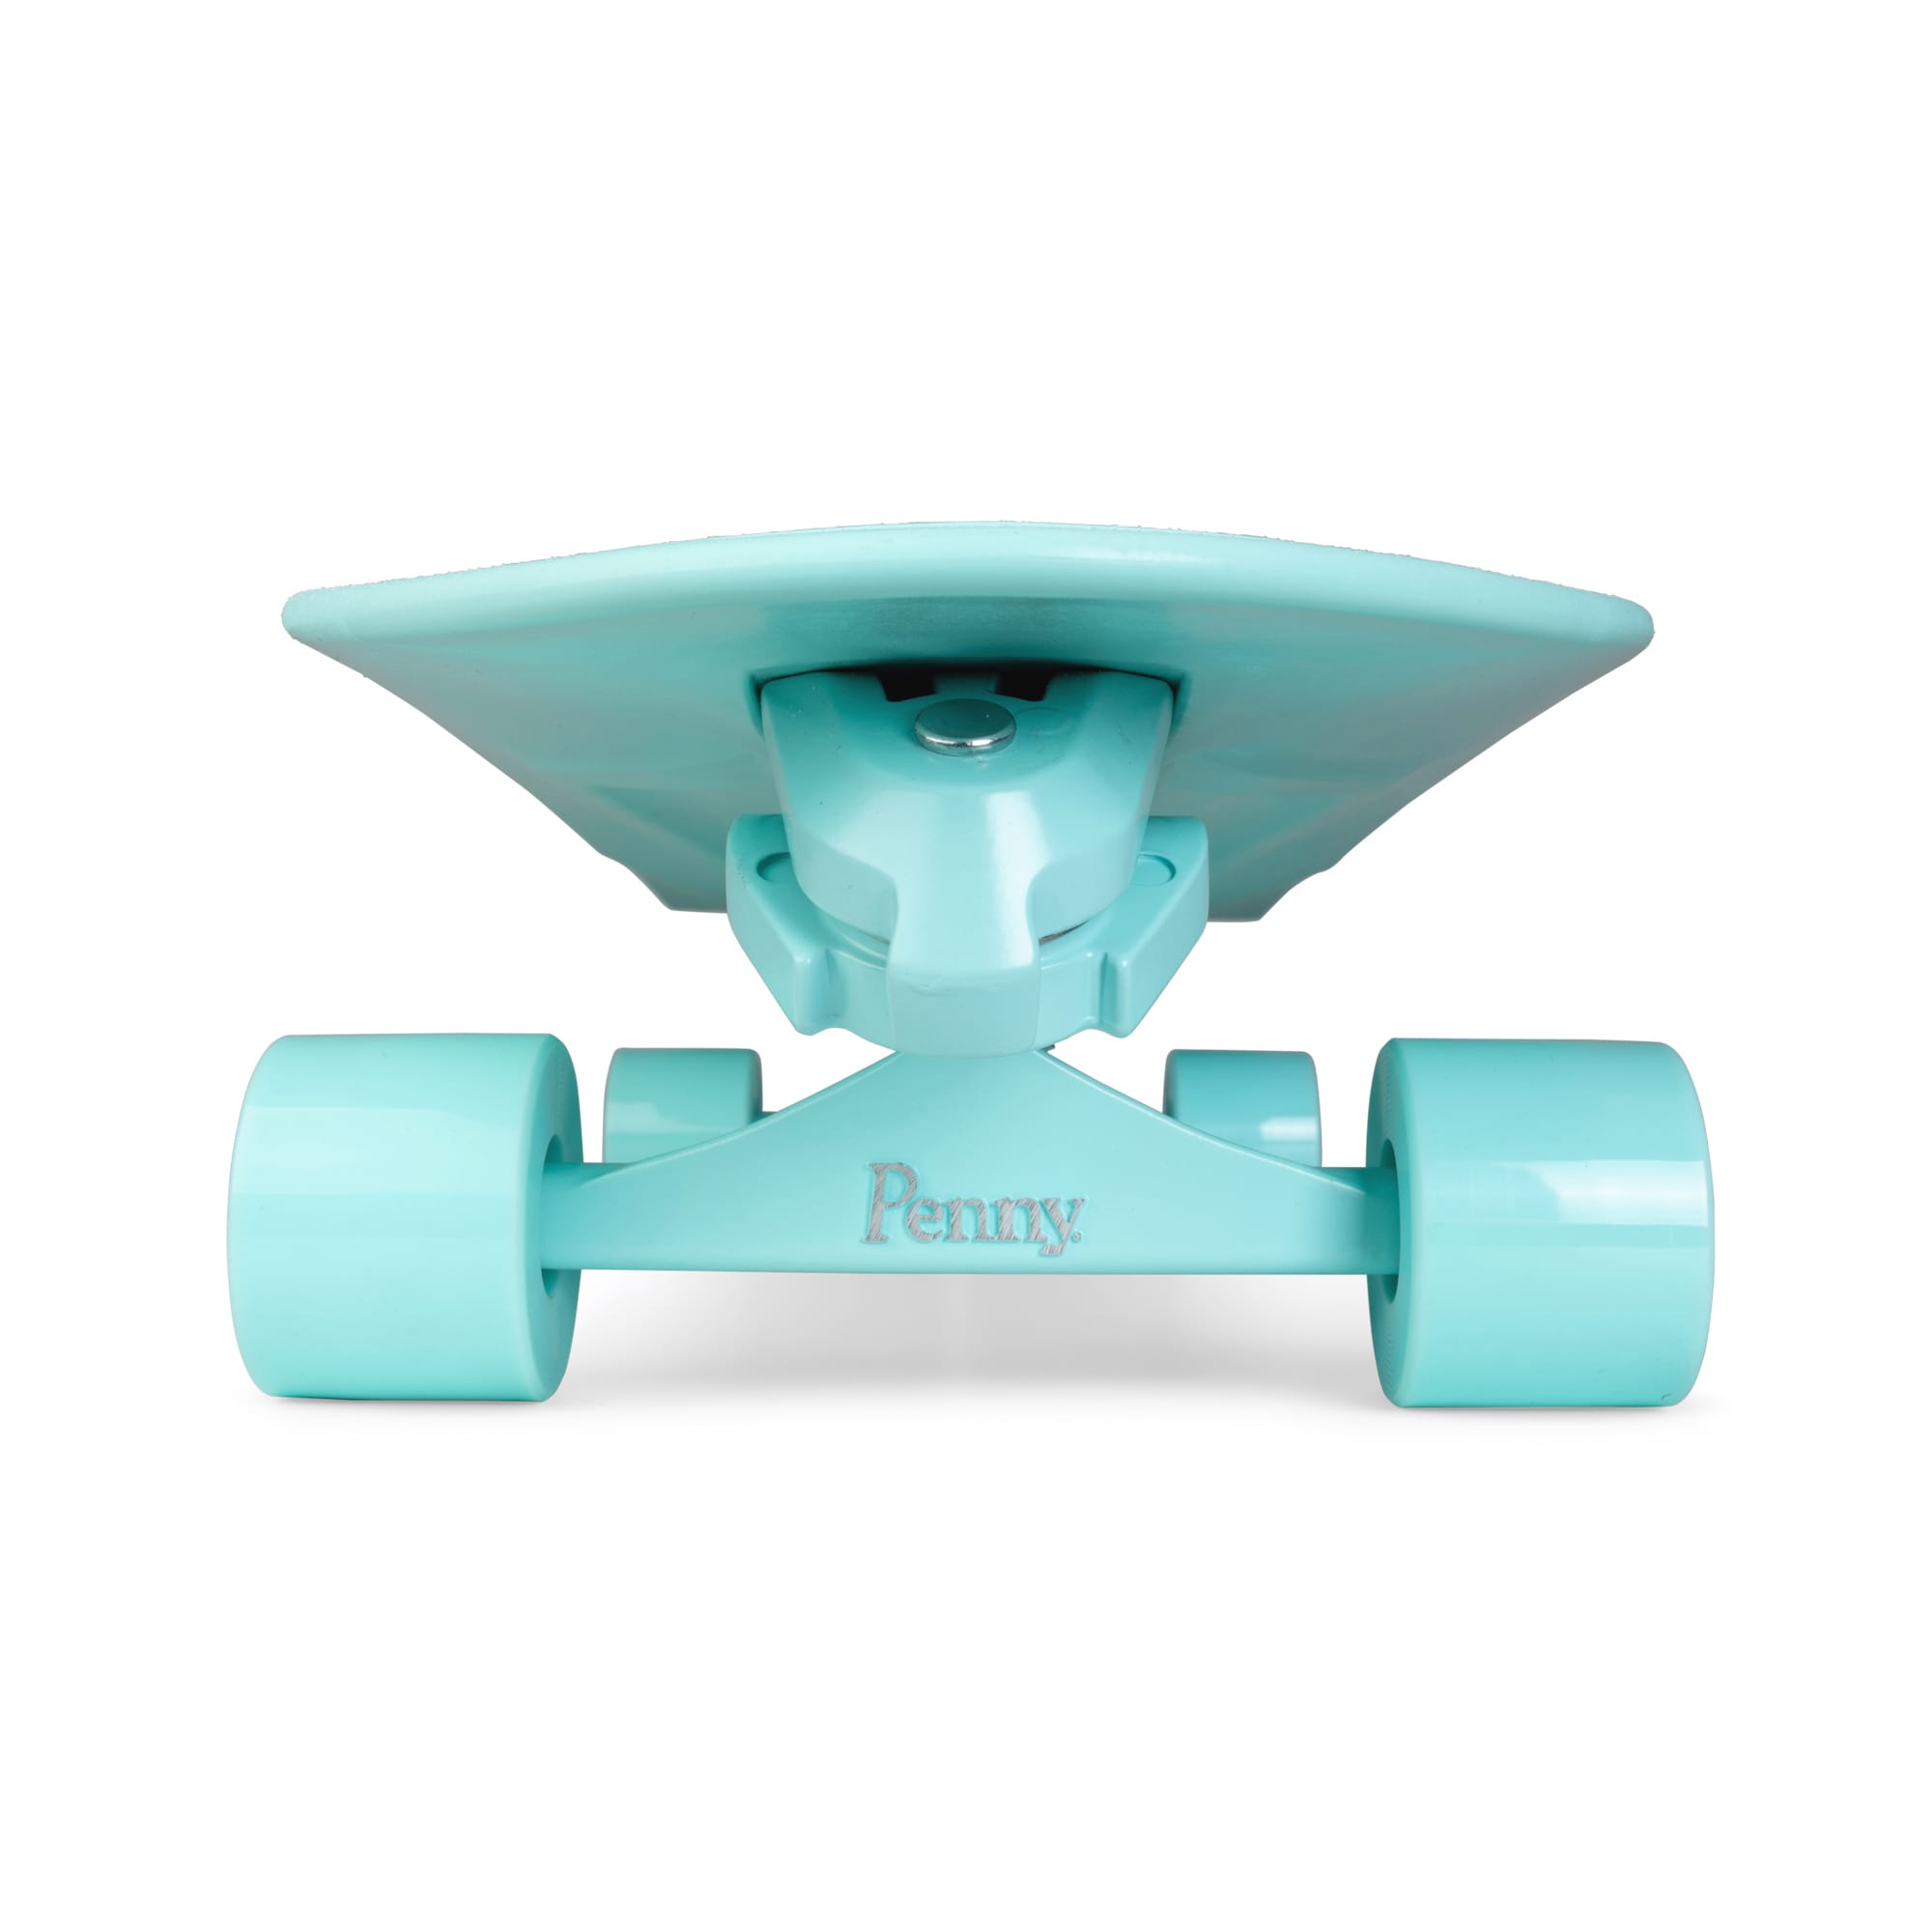 Mint High-Line Surfskate Mint Complete Cruiser Skateboard by Penny 